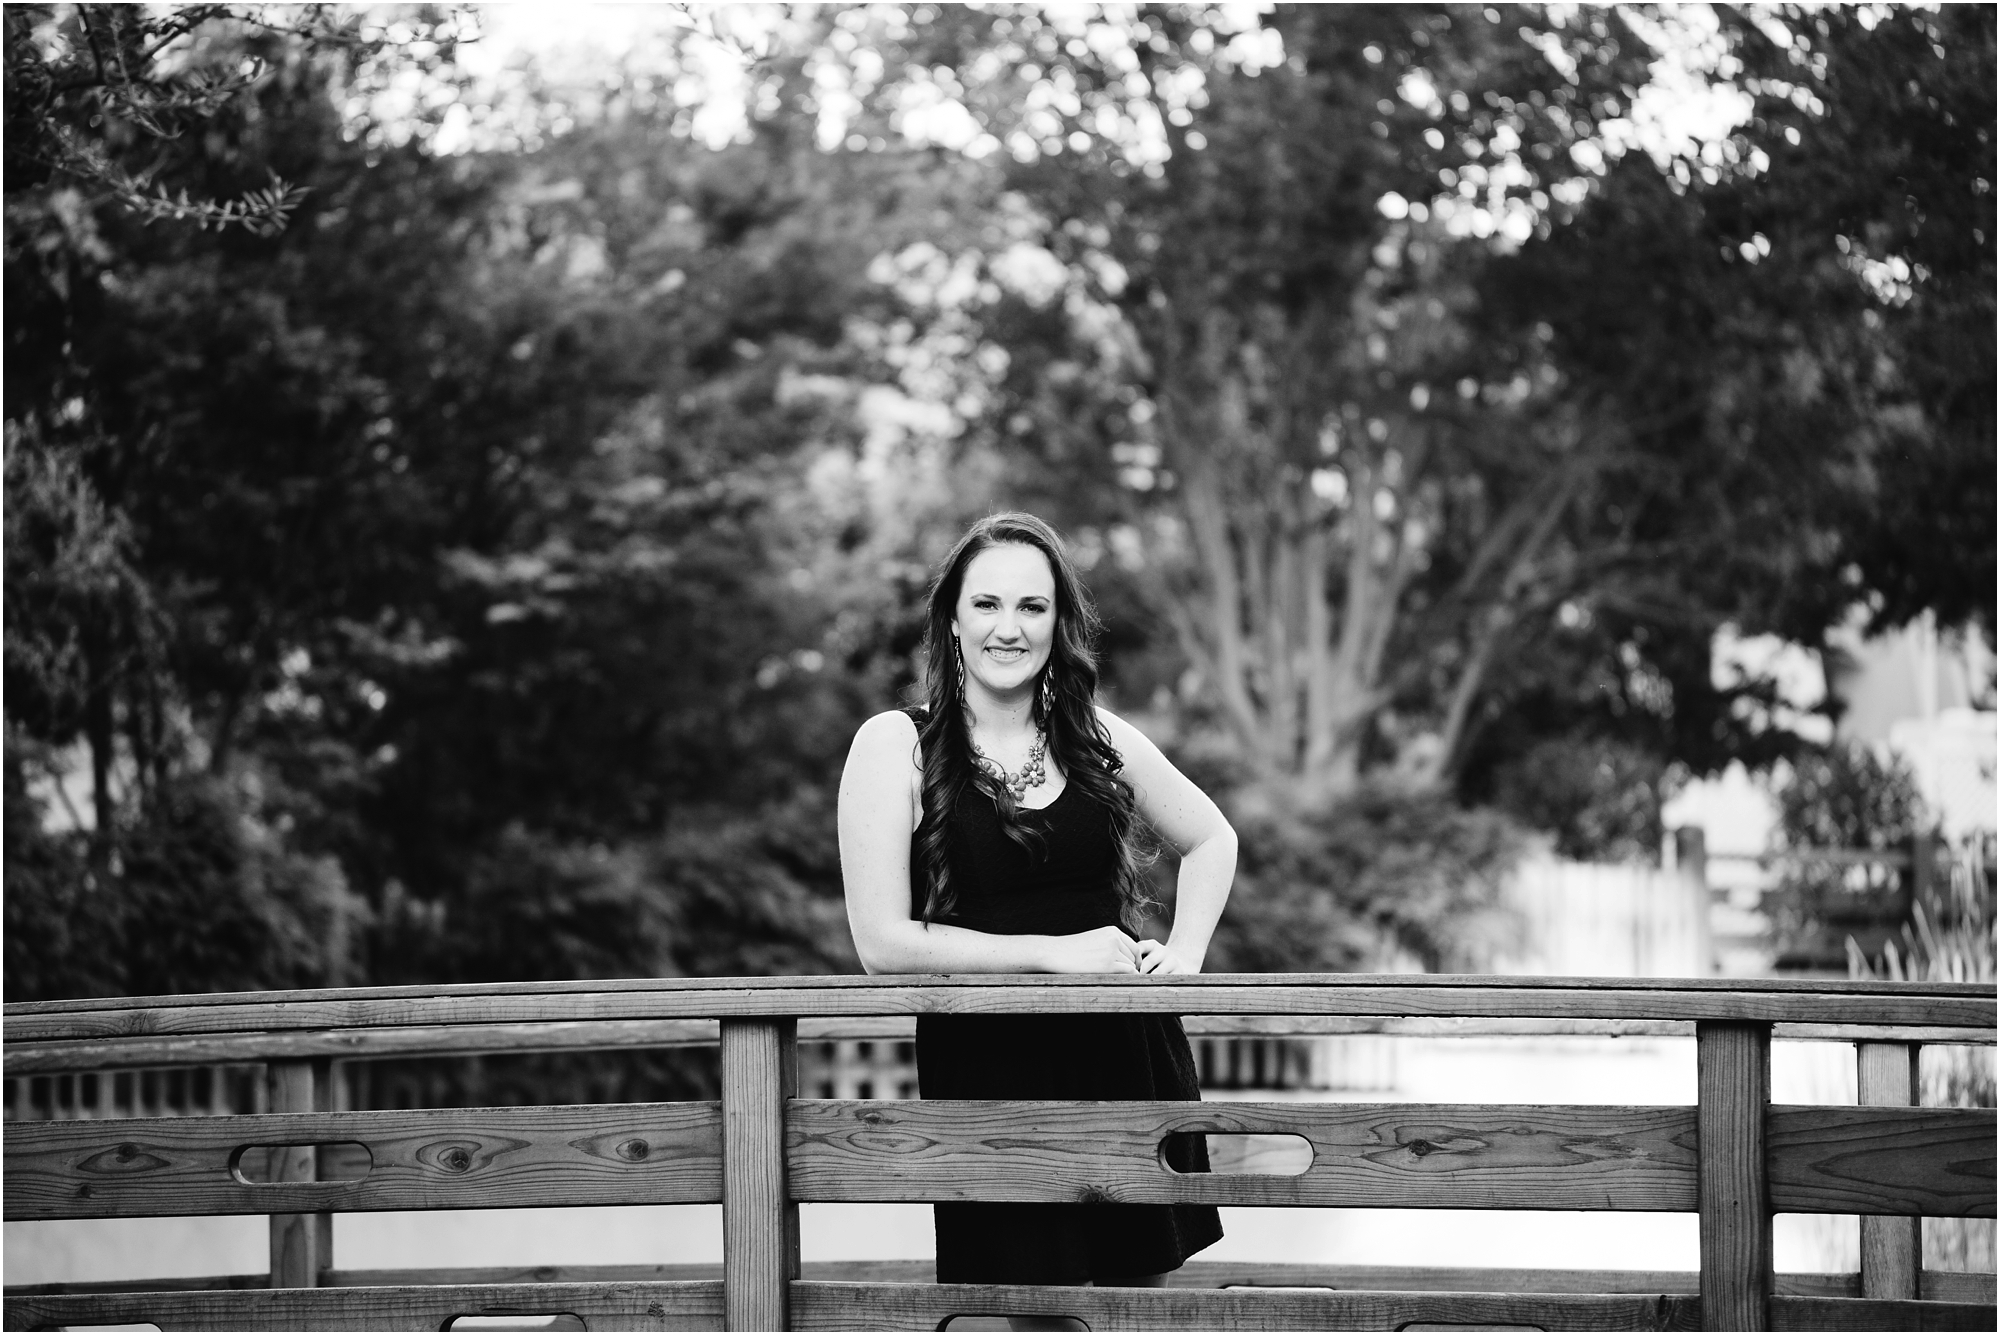 brittneyhannonphotography.com